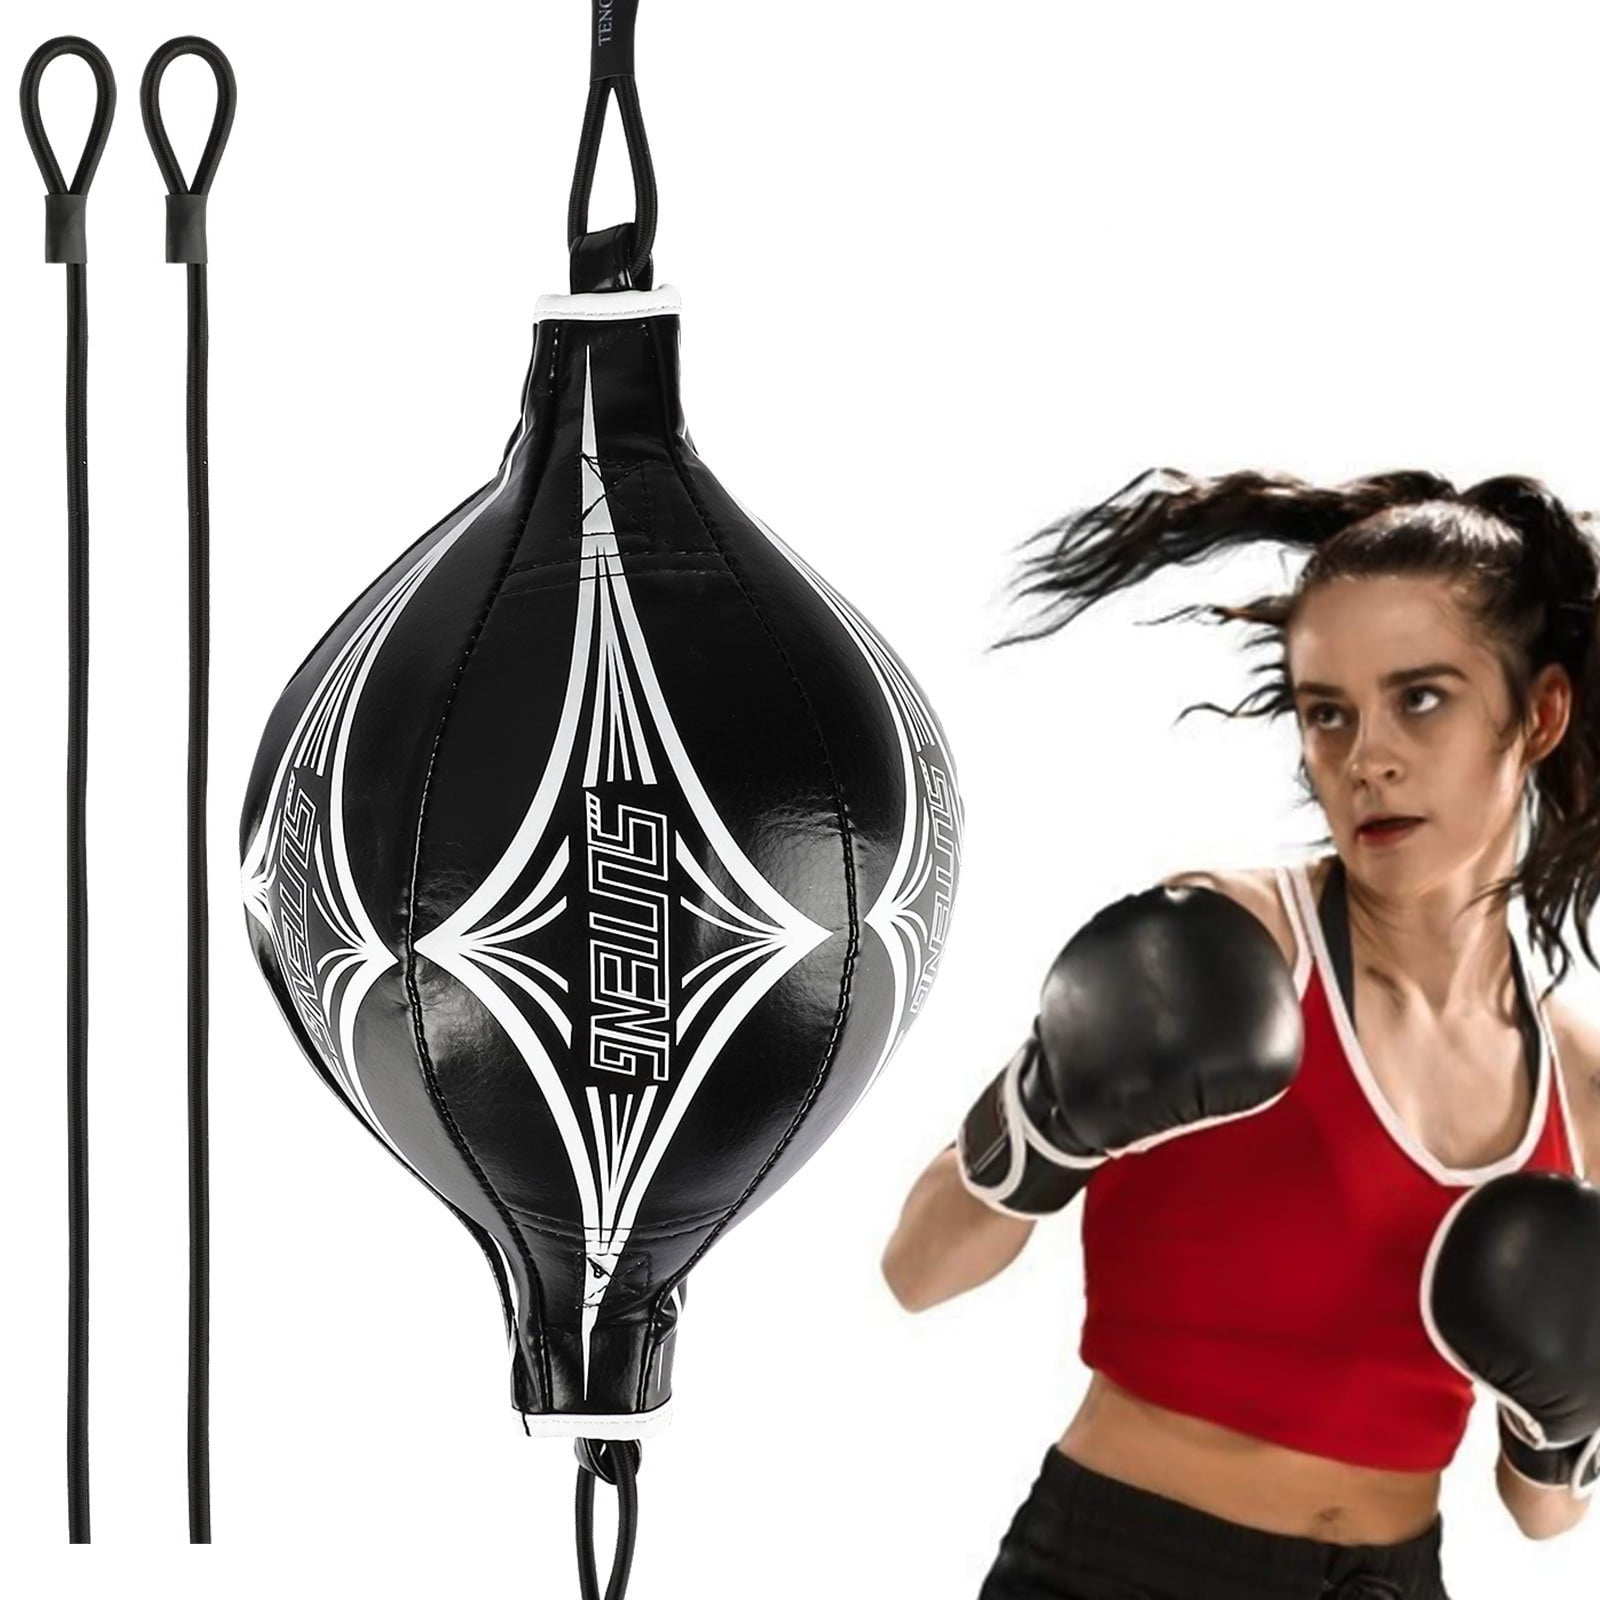 Double End Boxing Speed Ball Focus Training Equipment Kick Punch Workout Bag 